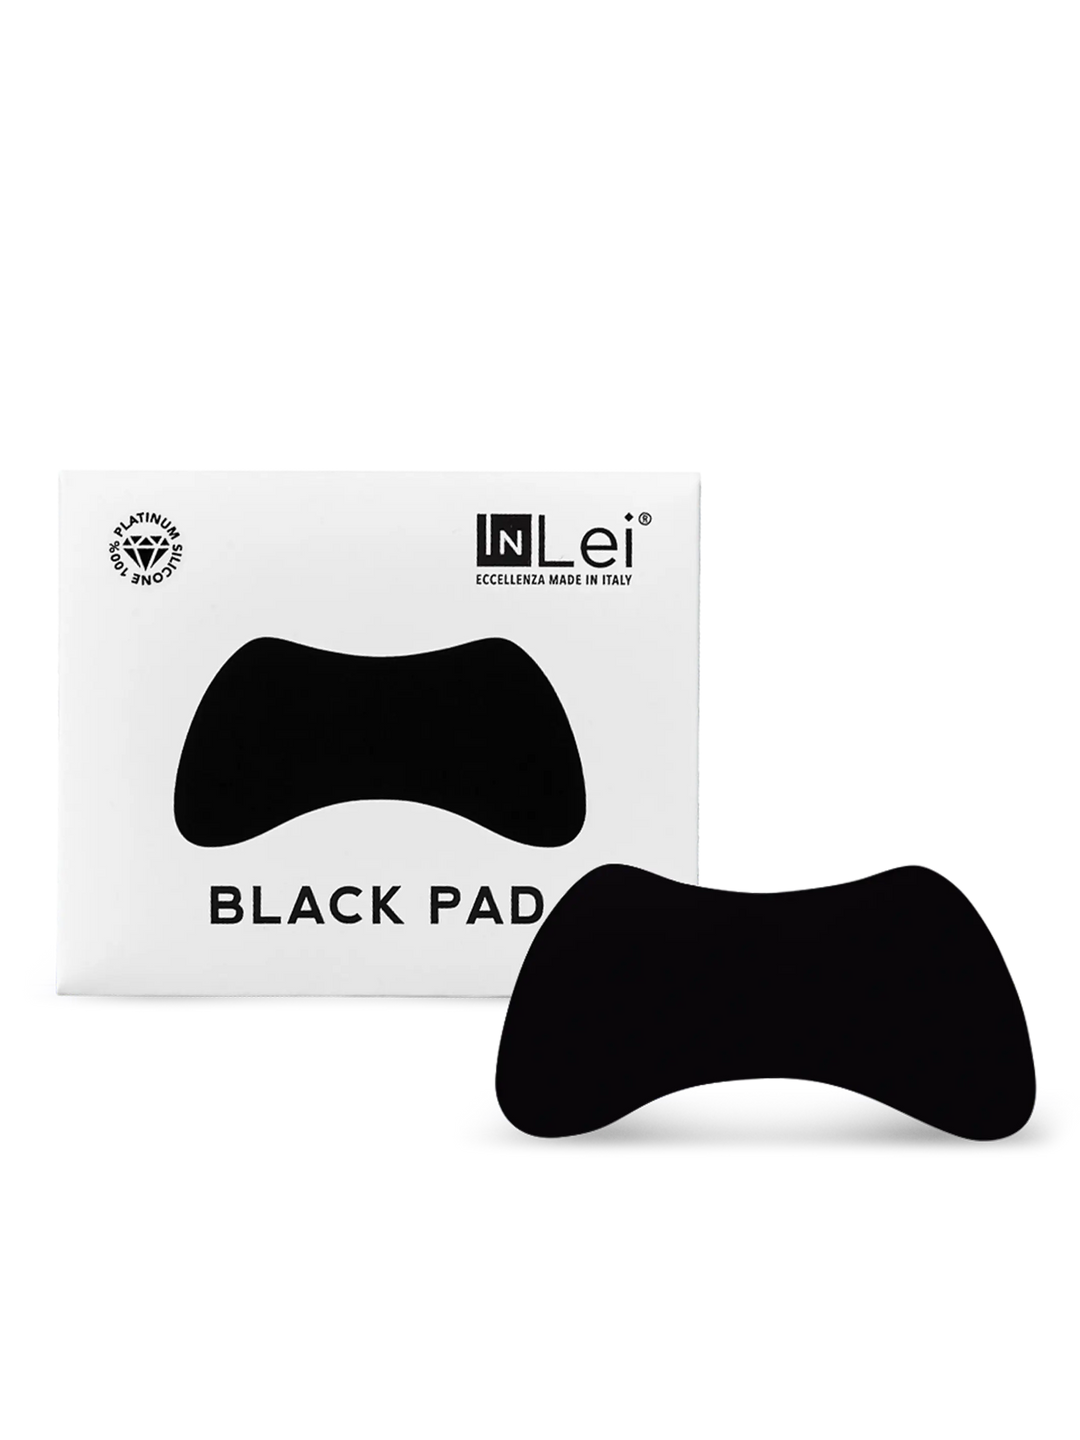 BLACK PAD | multipurpose pads to isolate the lower lashes